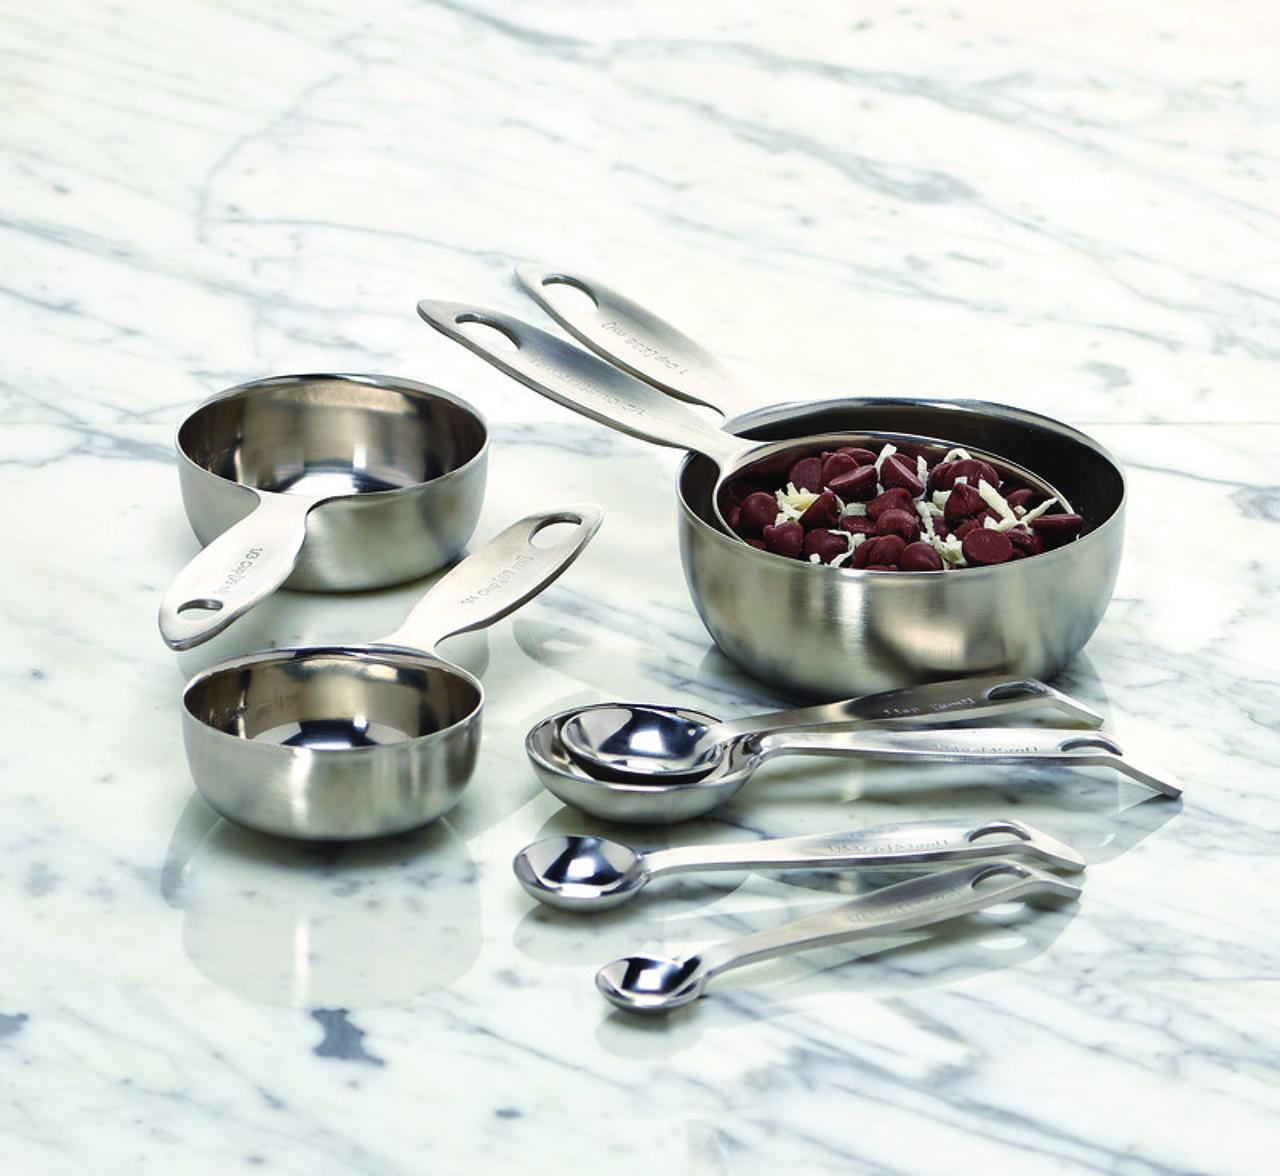 Amco Brushed Stainless Steel 4 Piece Measuring Spoon Set 